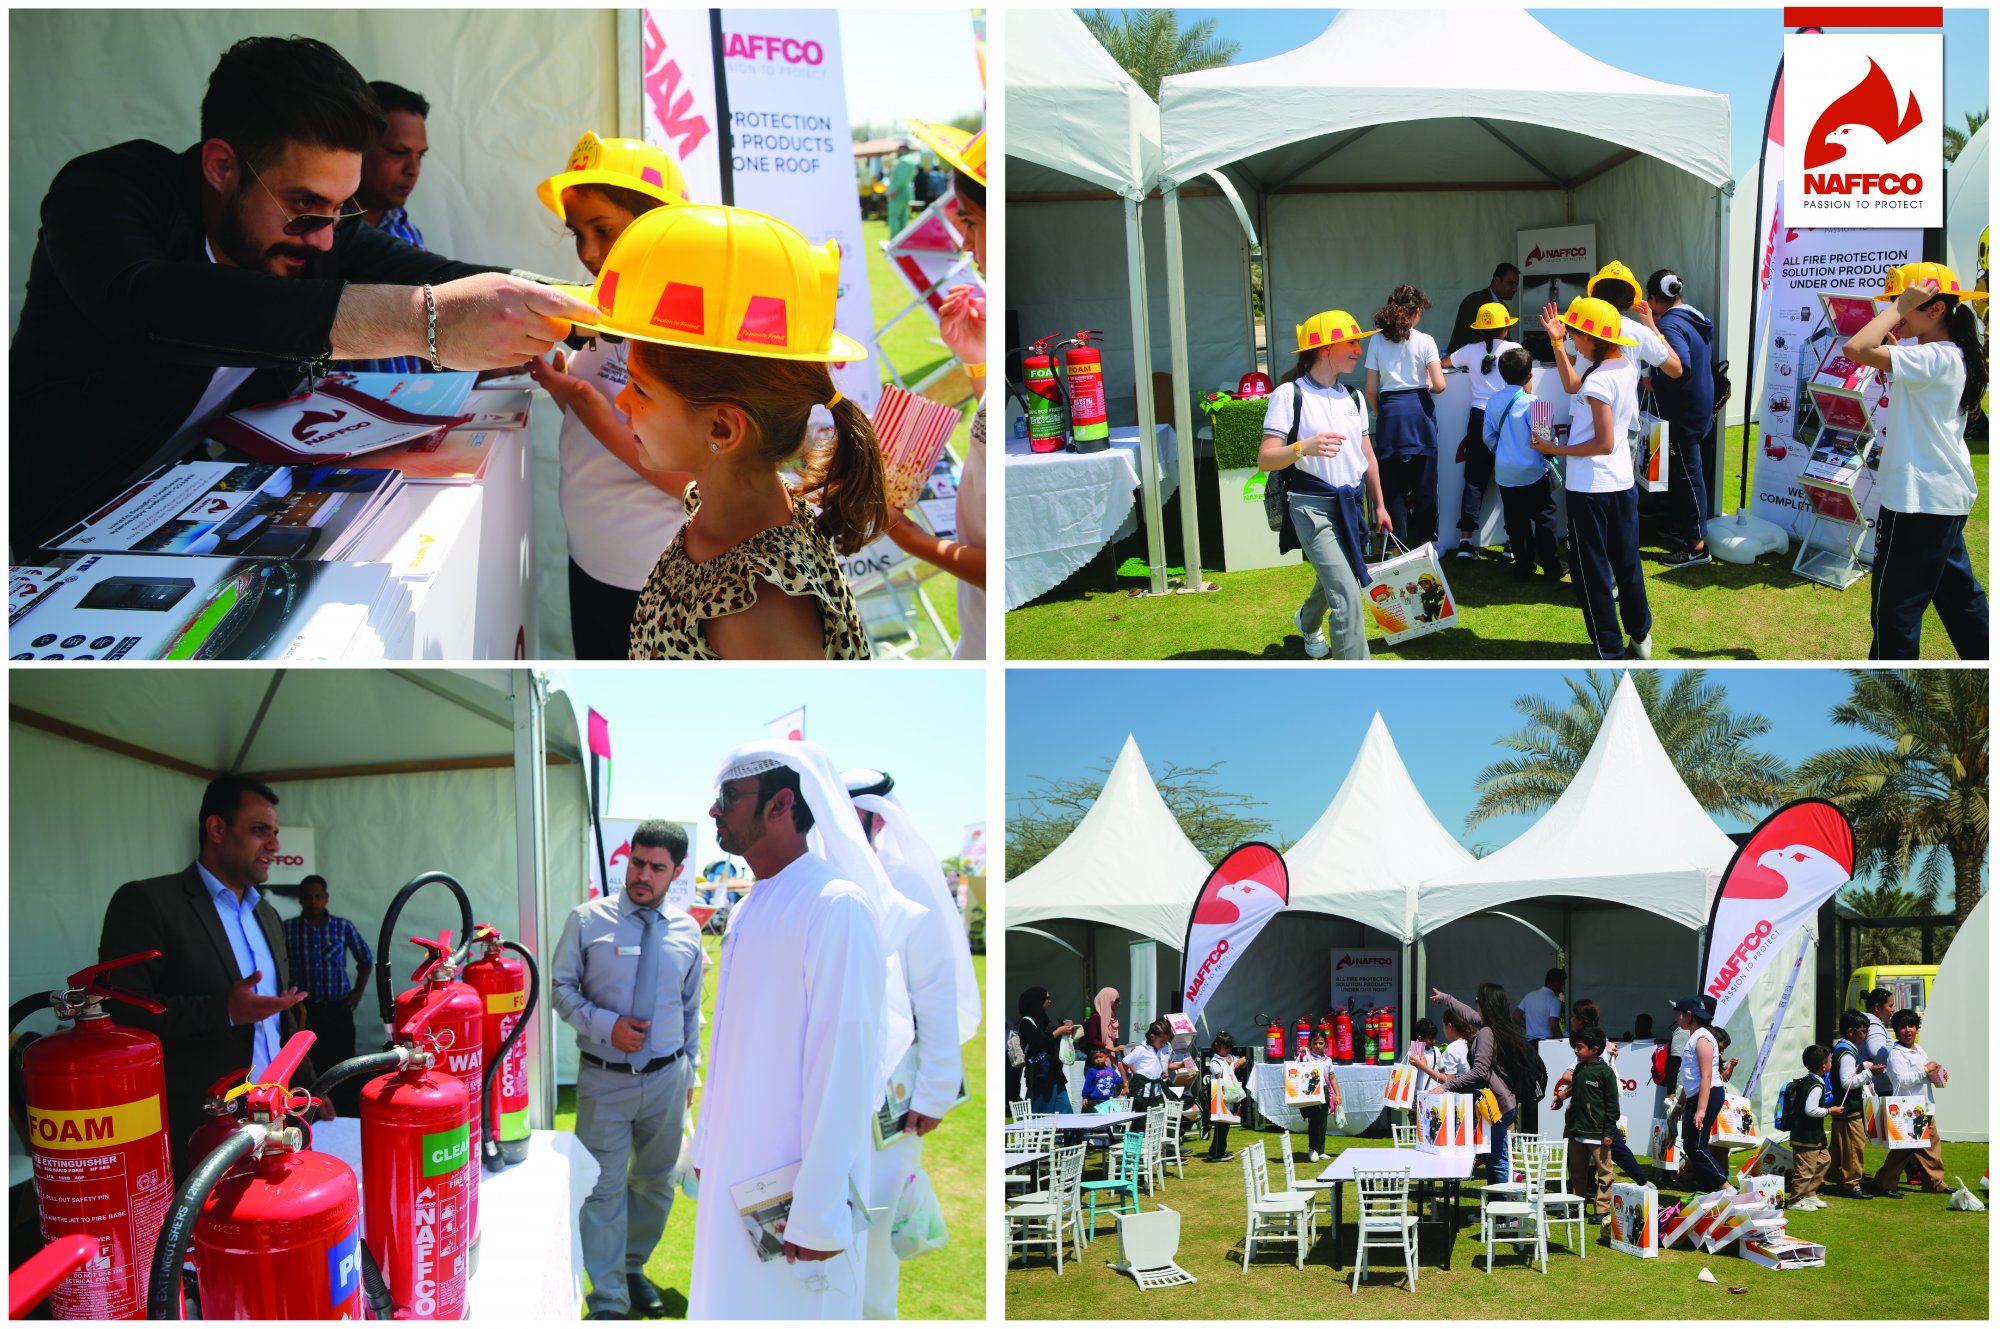 NAFFCO participated in the International Civil Defence Day Event 2019